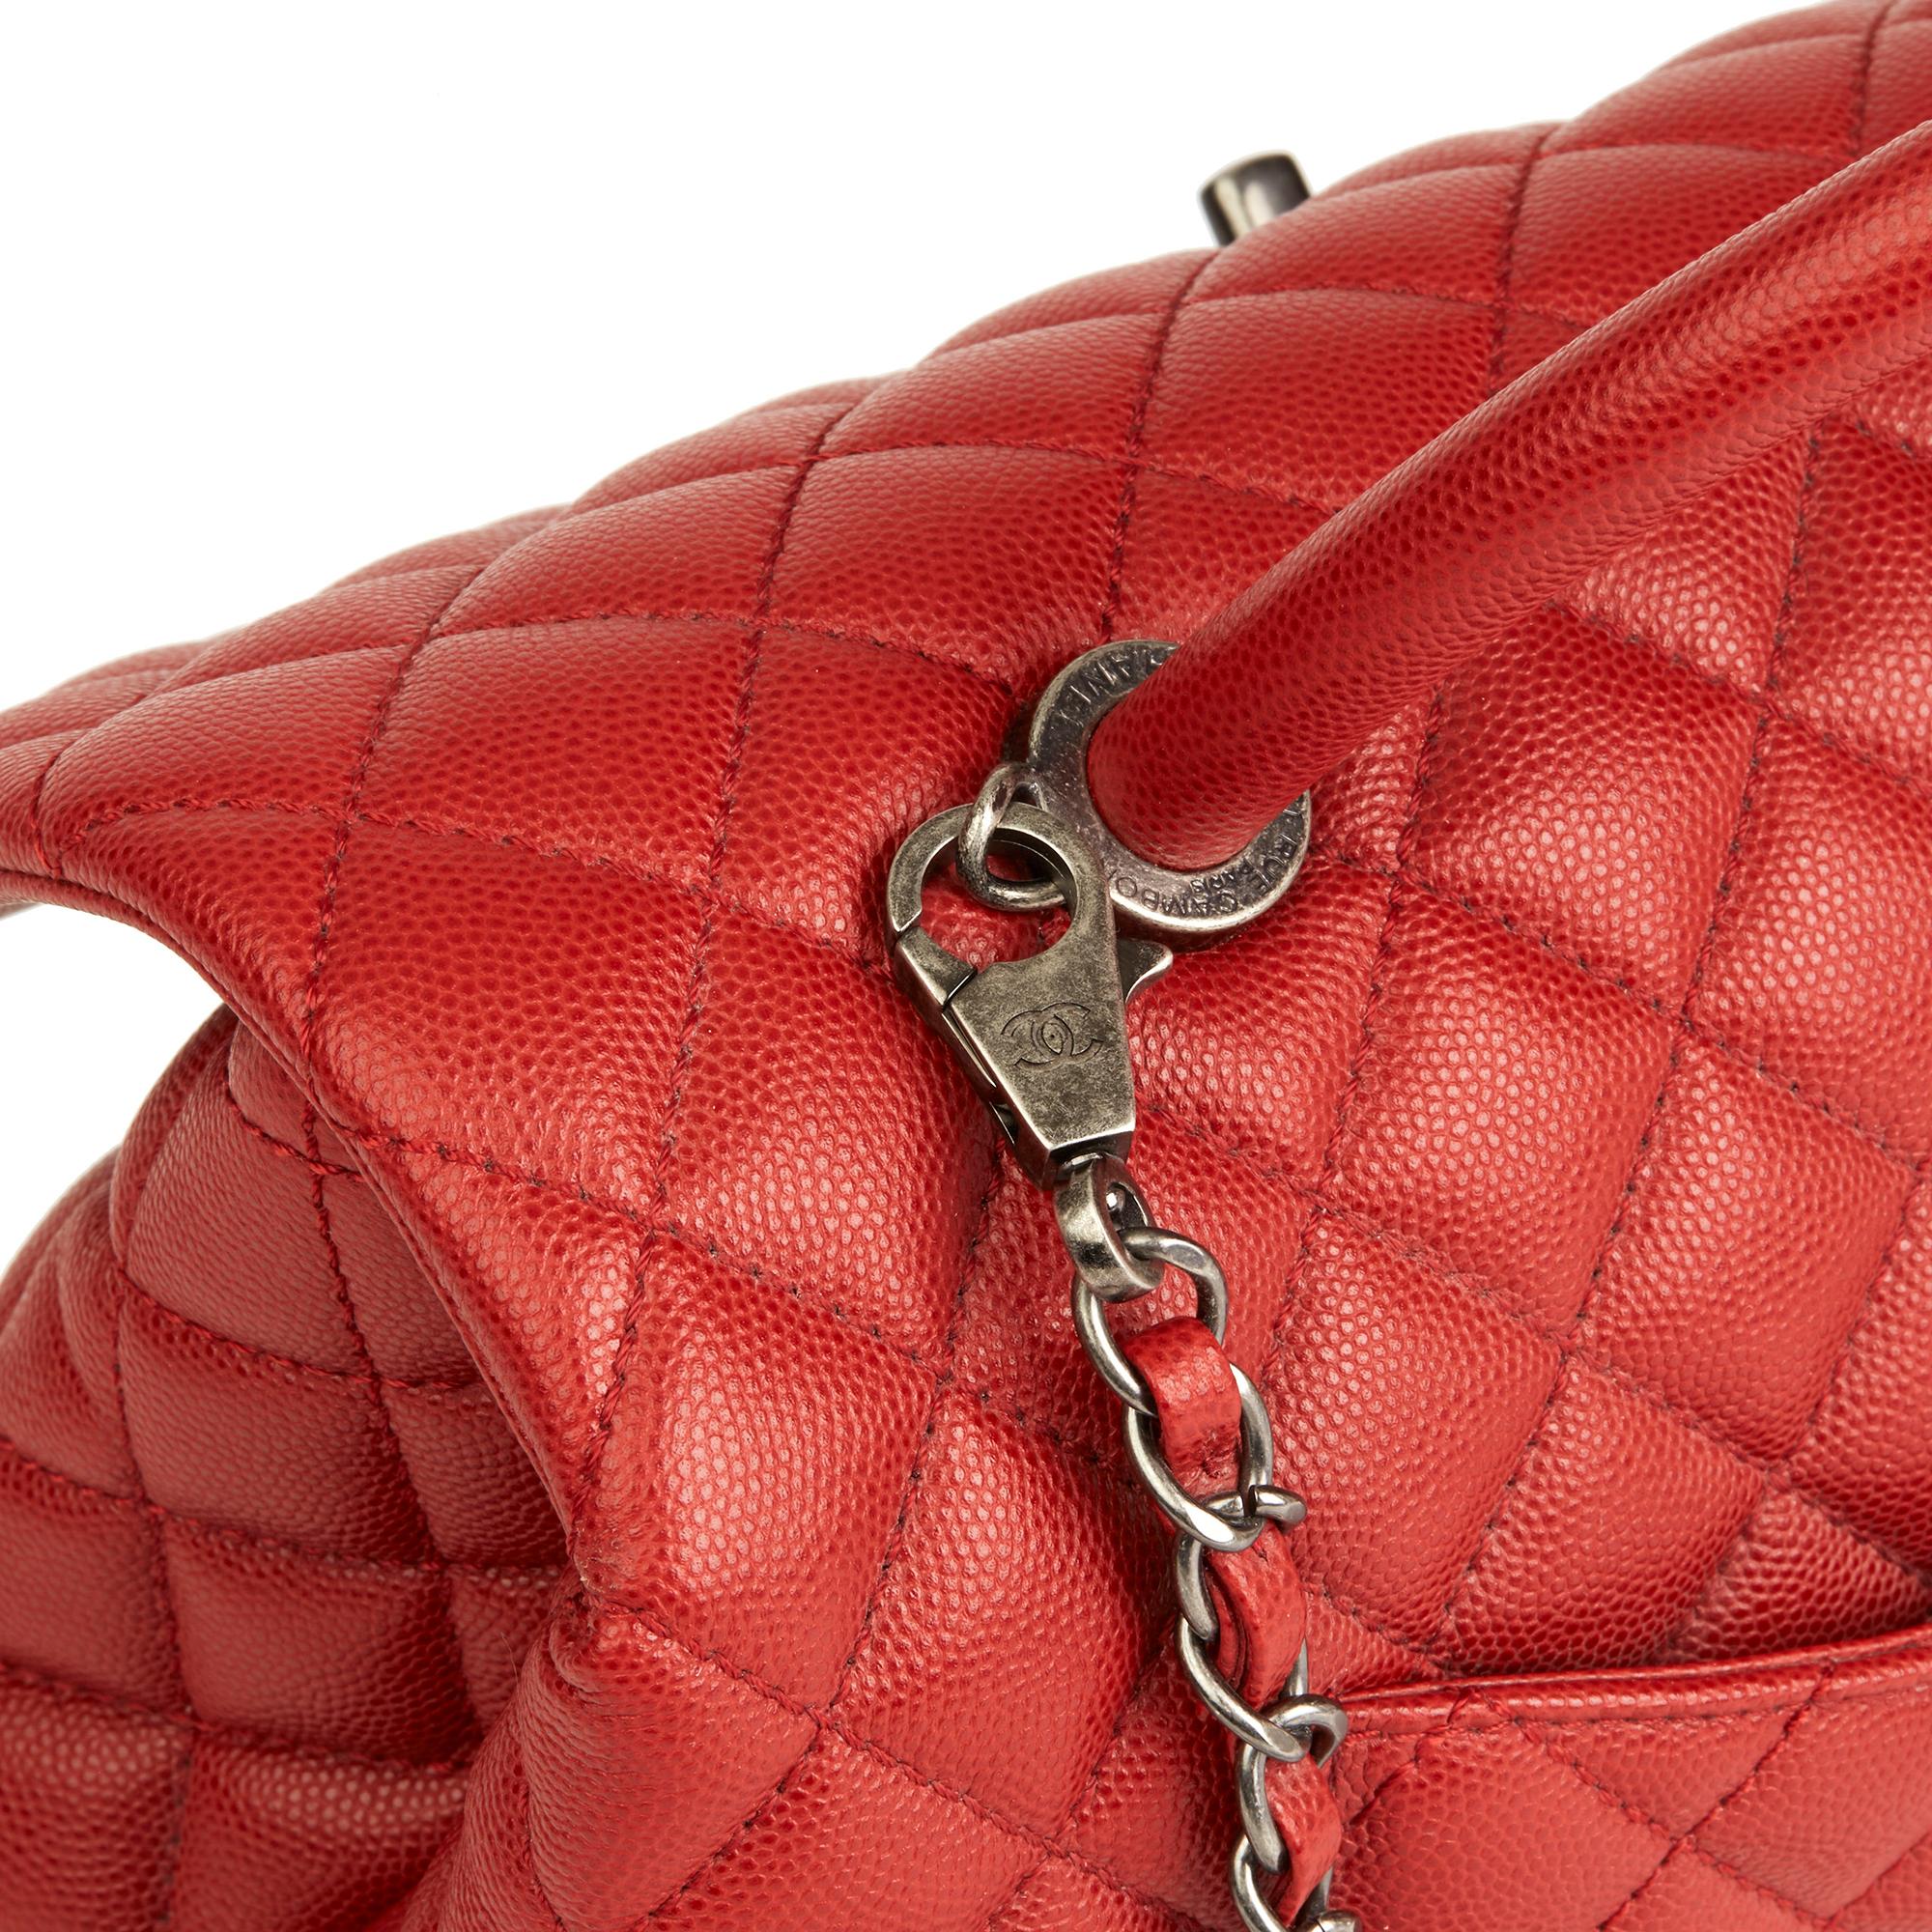 Women's 2016 Chanel Red Quilted Caviar Leather Medium Coco Handle